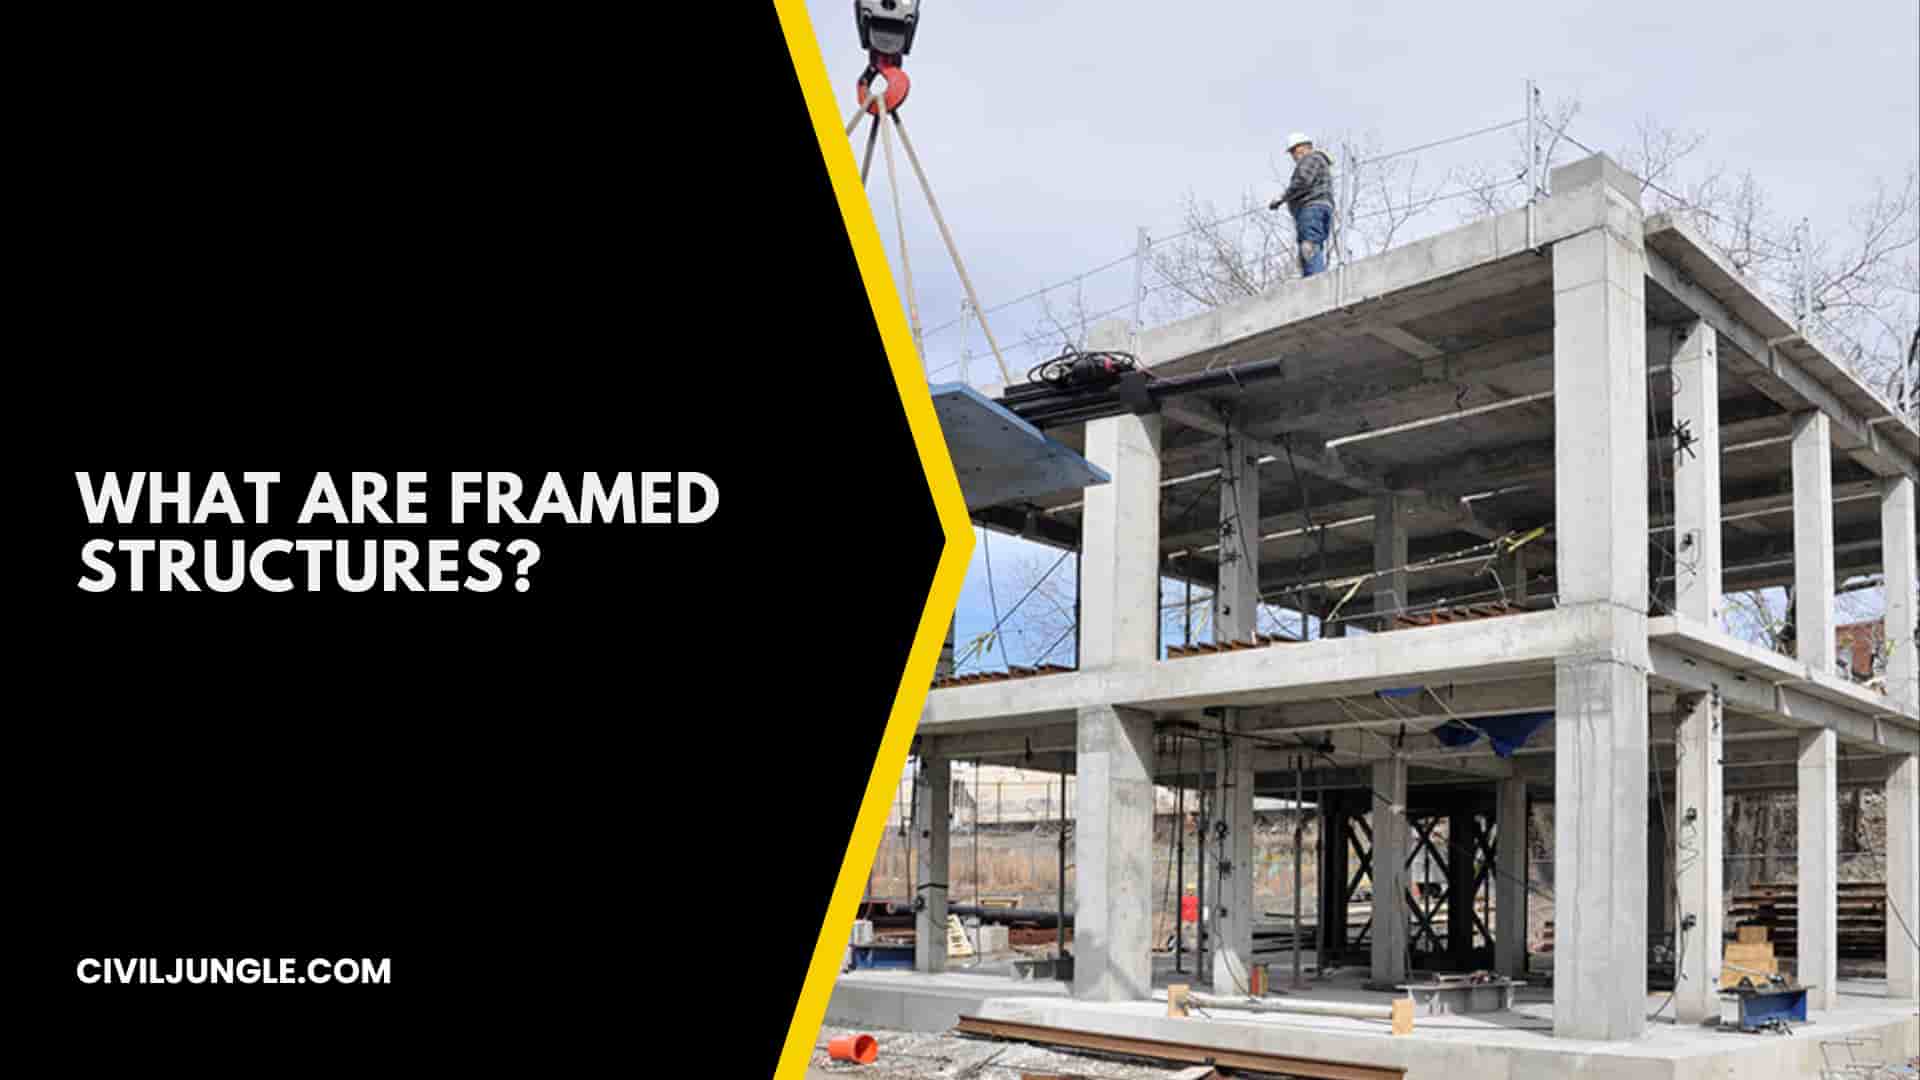 What Are Framed Structures?